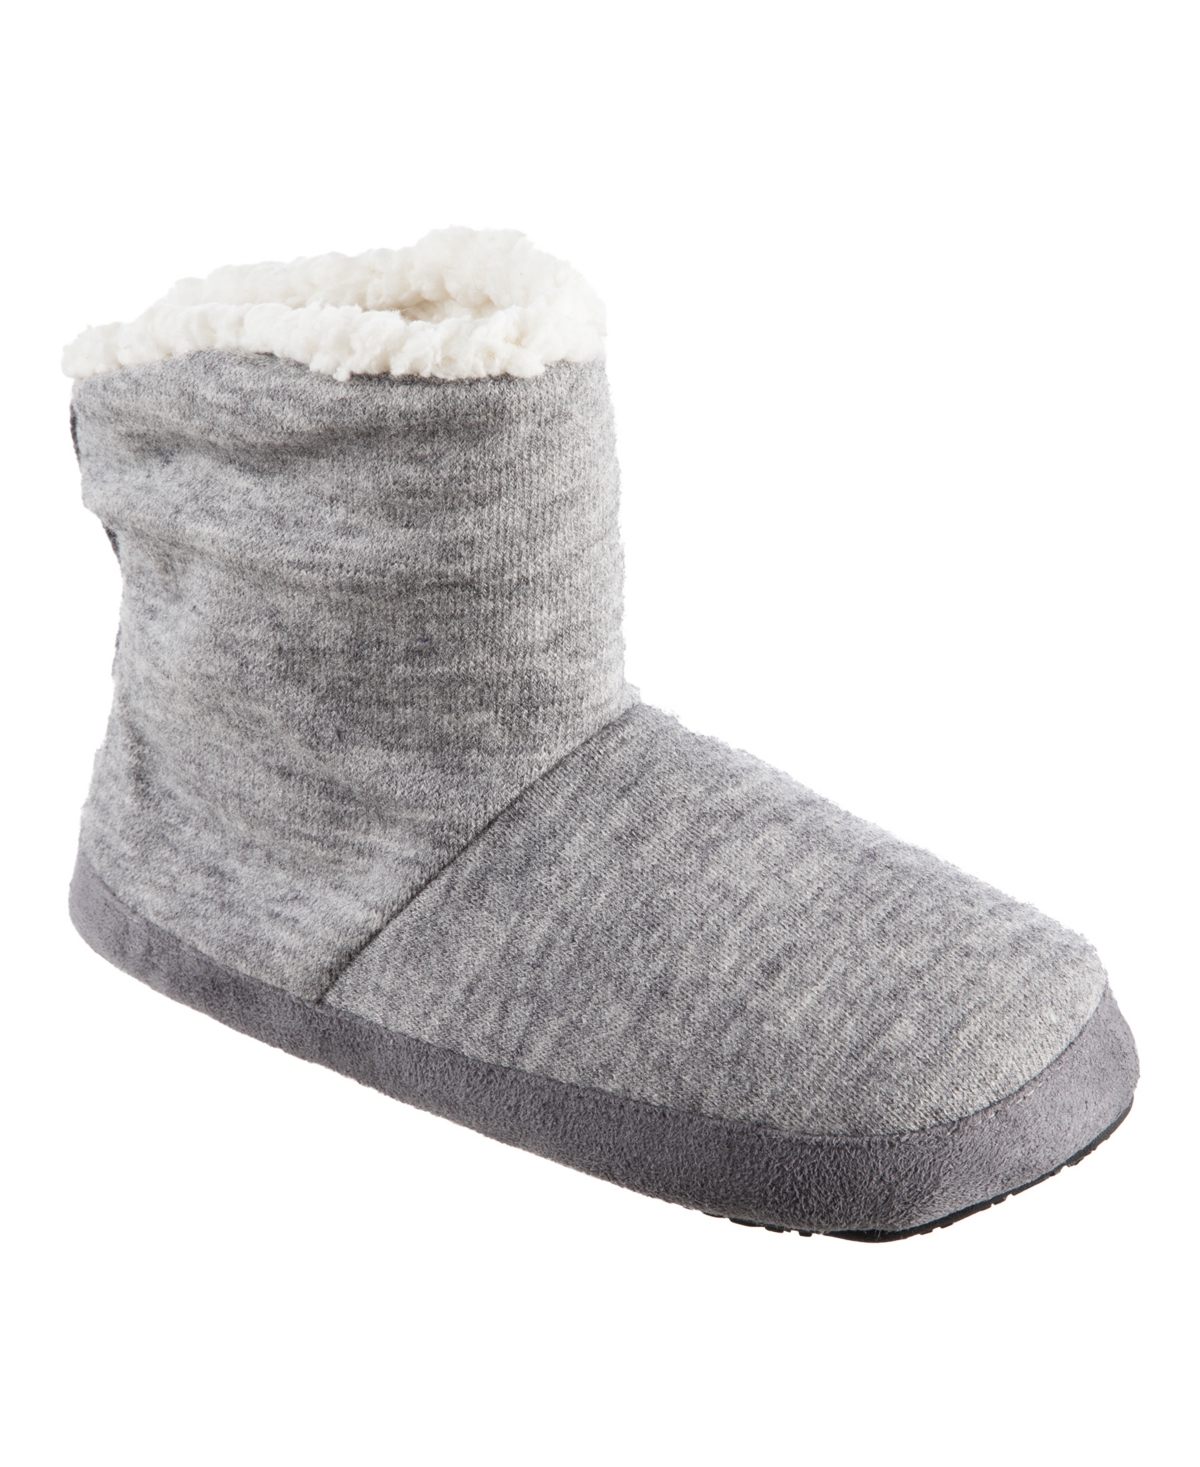 Women's Microsuede and Heathered Knit Marisol Boot Slipper, Online Only - Navy/blue